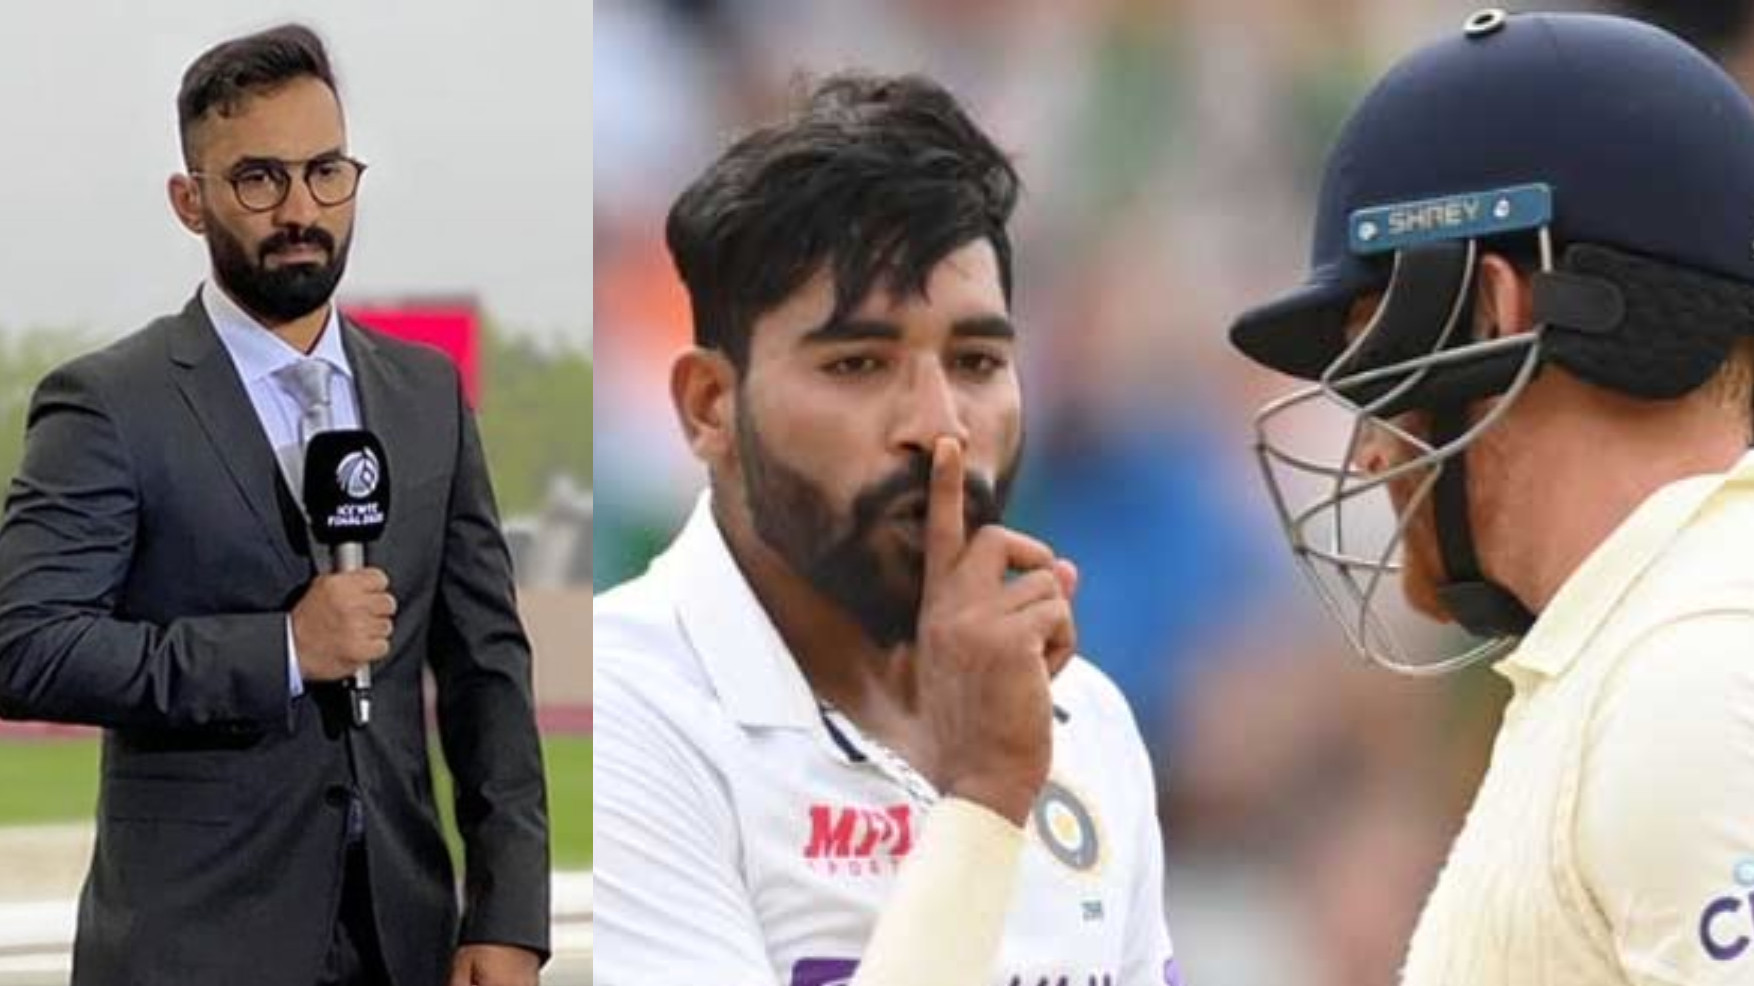 ENG v IND 2021: Mohammed Siraj shushing Jonny Bairstow was unnecessary, he’ll learn from it- Dinesh Karthik